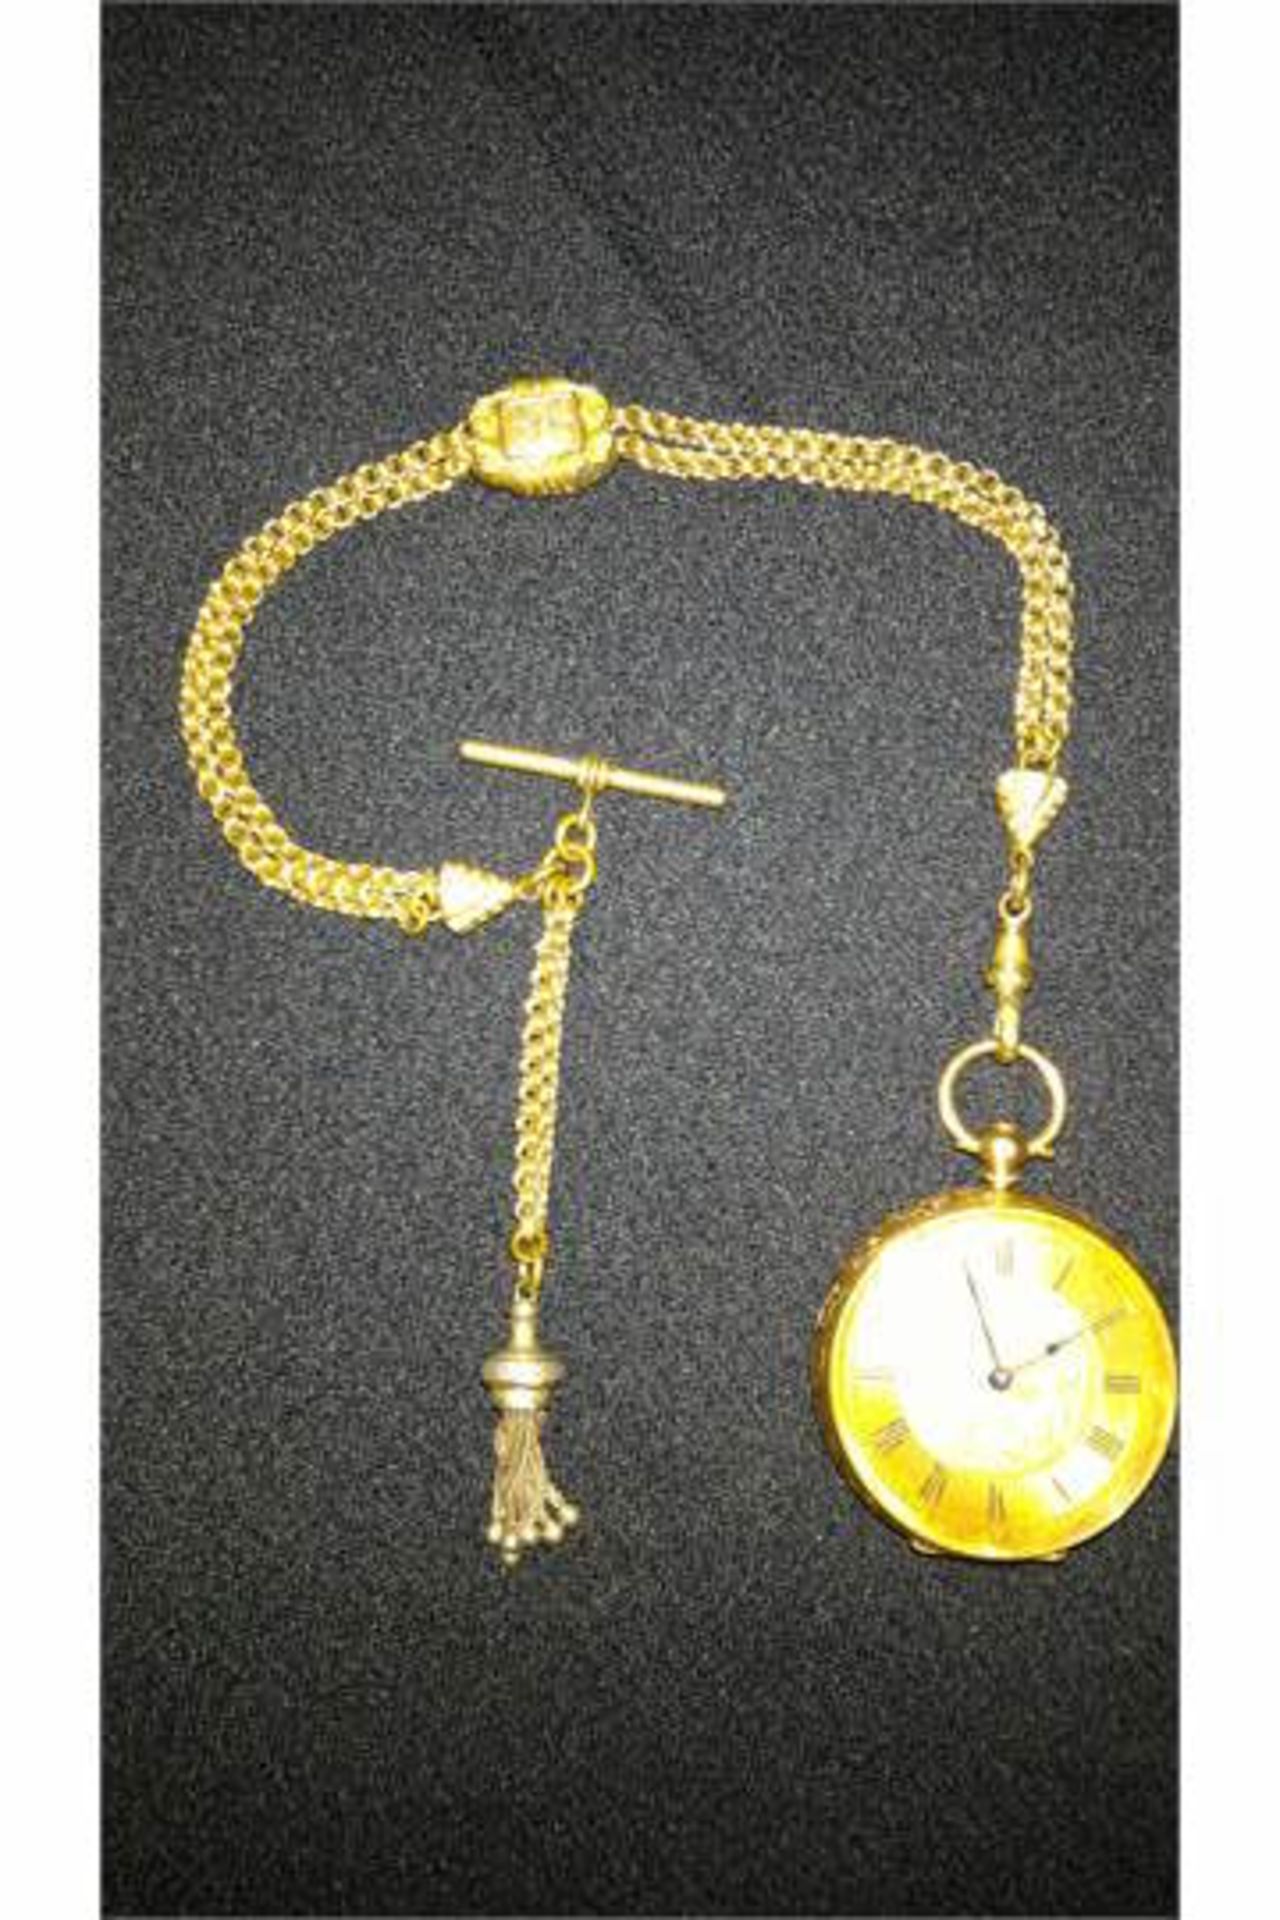 14 ct Cuivre pocket watch with yellow metal chain - Image 5 of 9